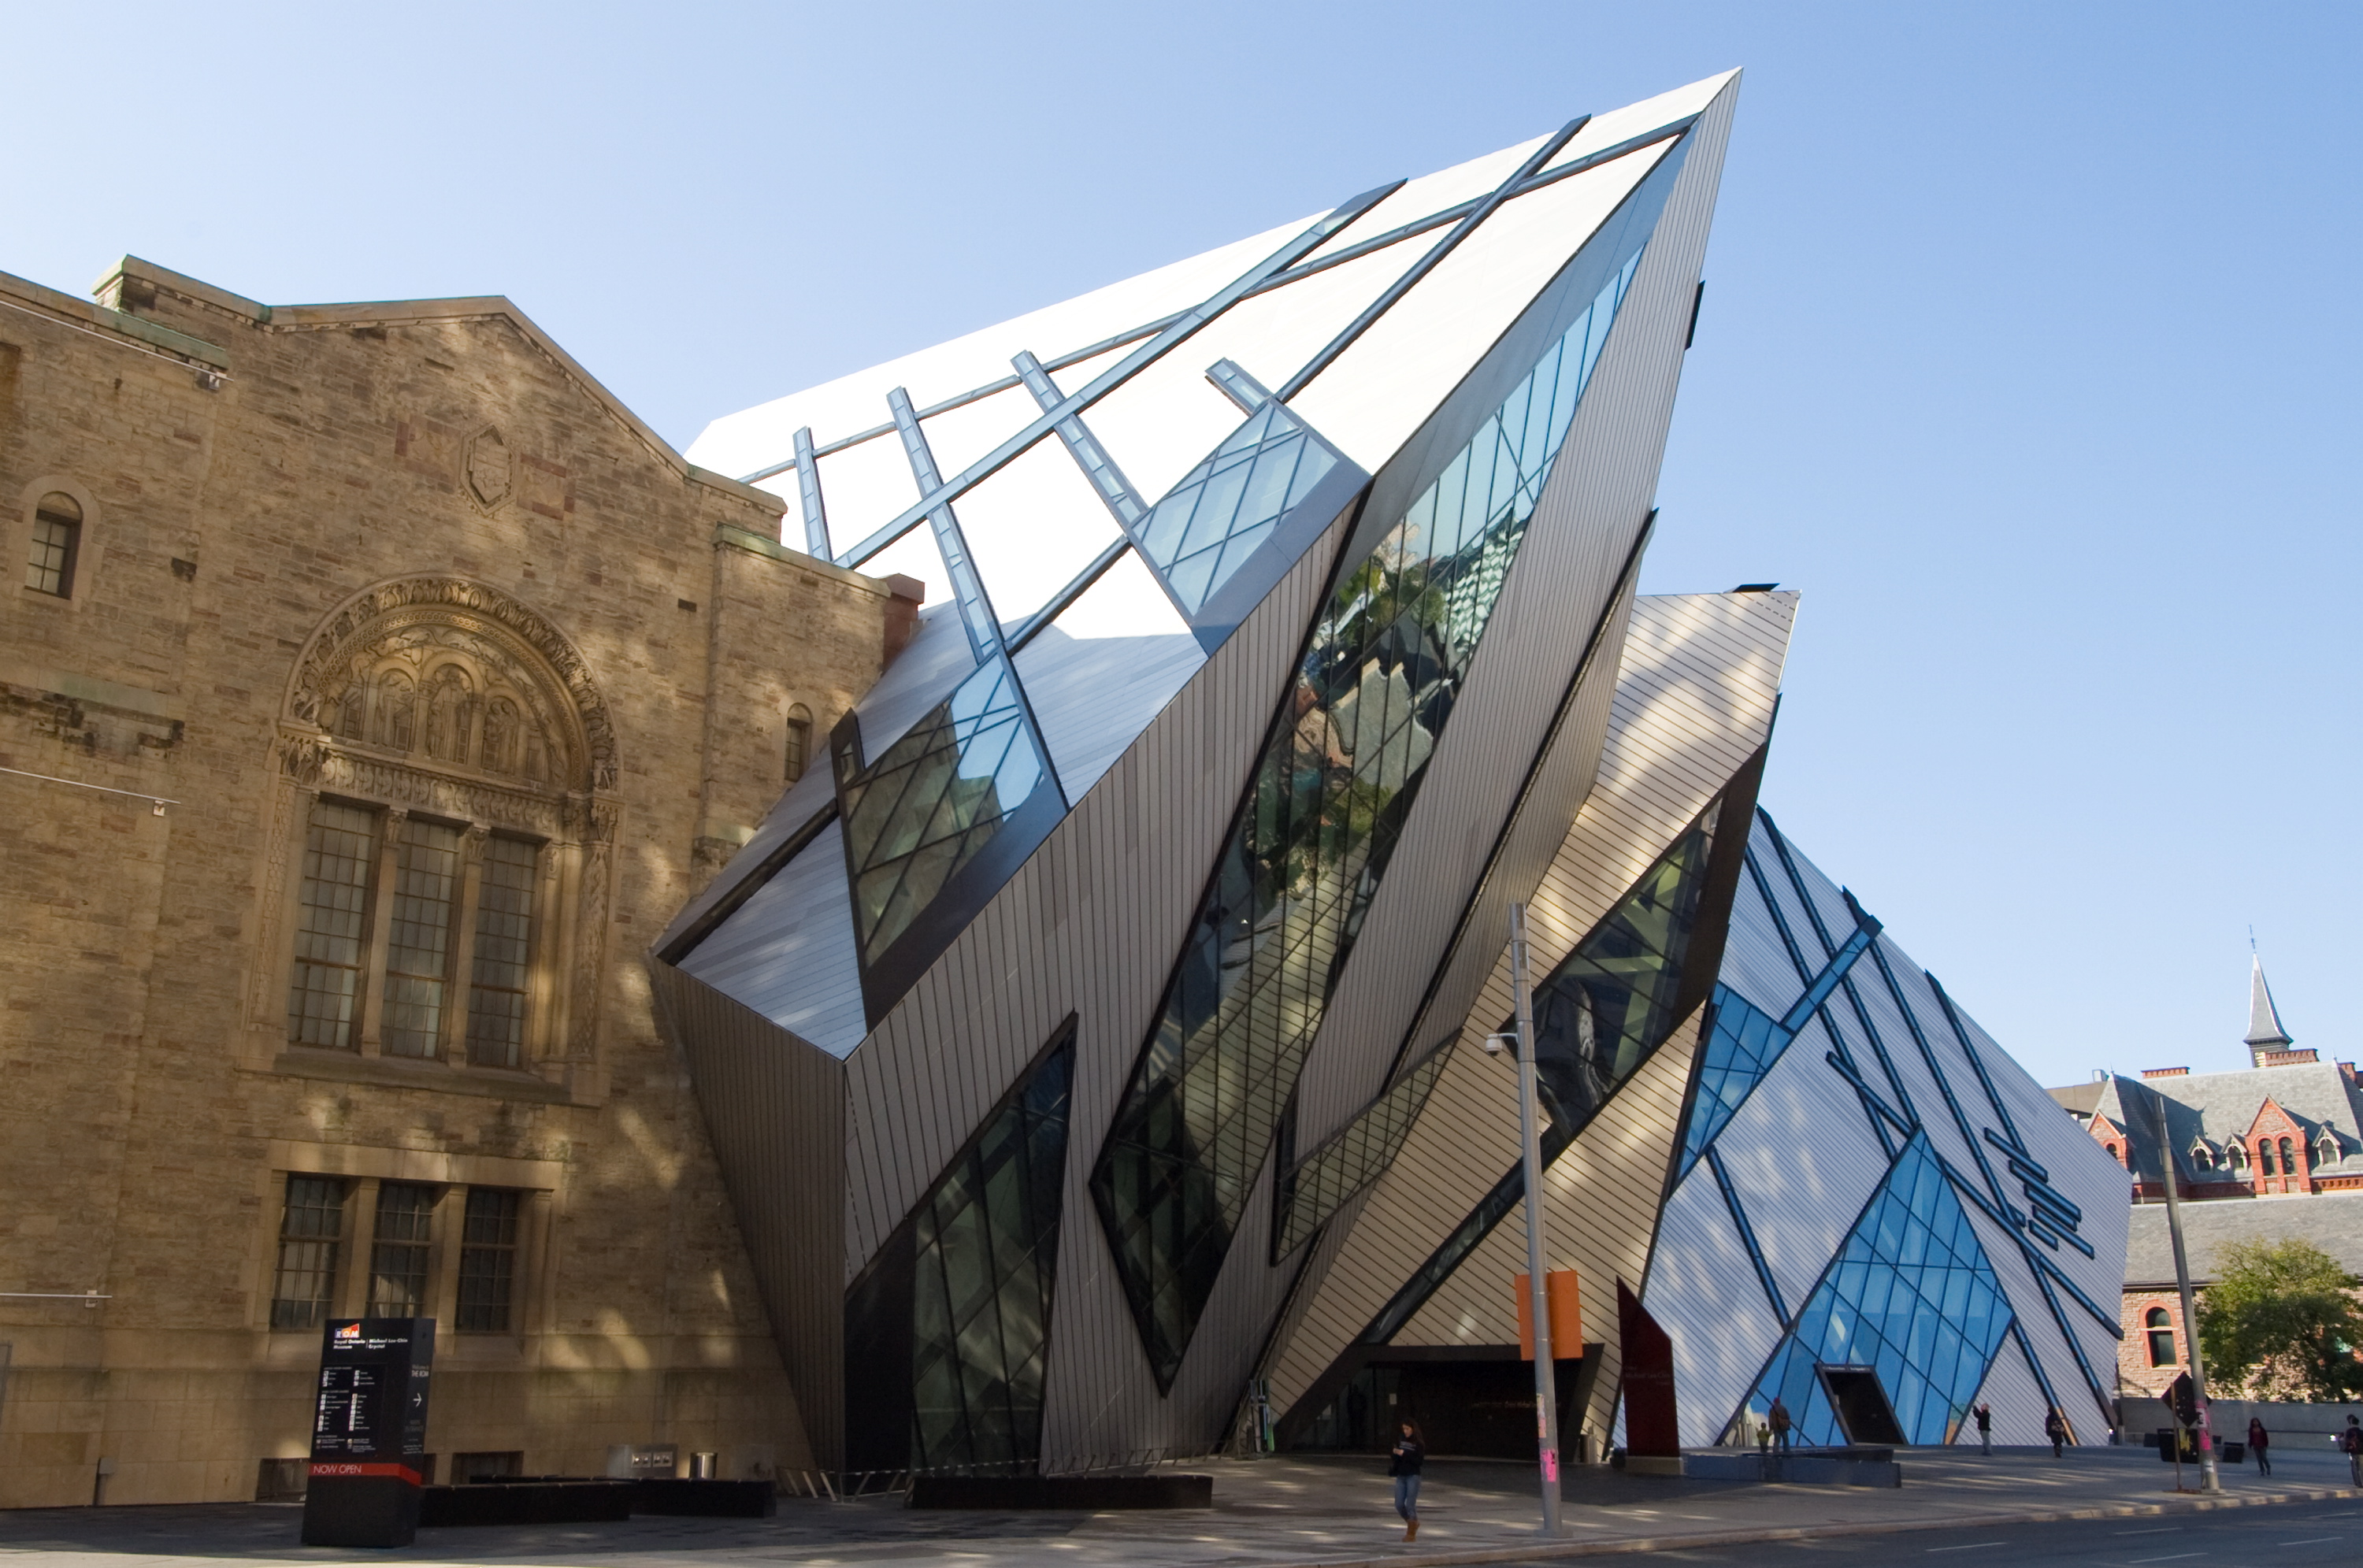 The Royal Ontario Museum by Daniel Libeskind